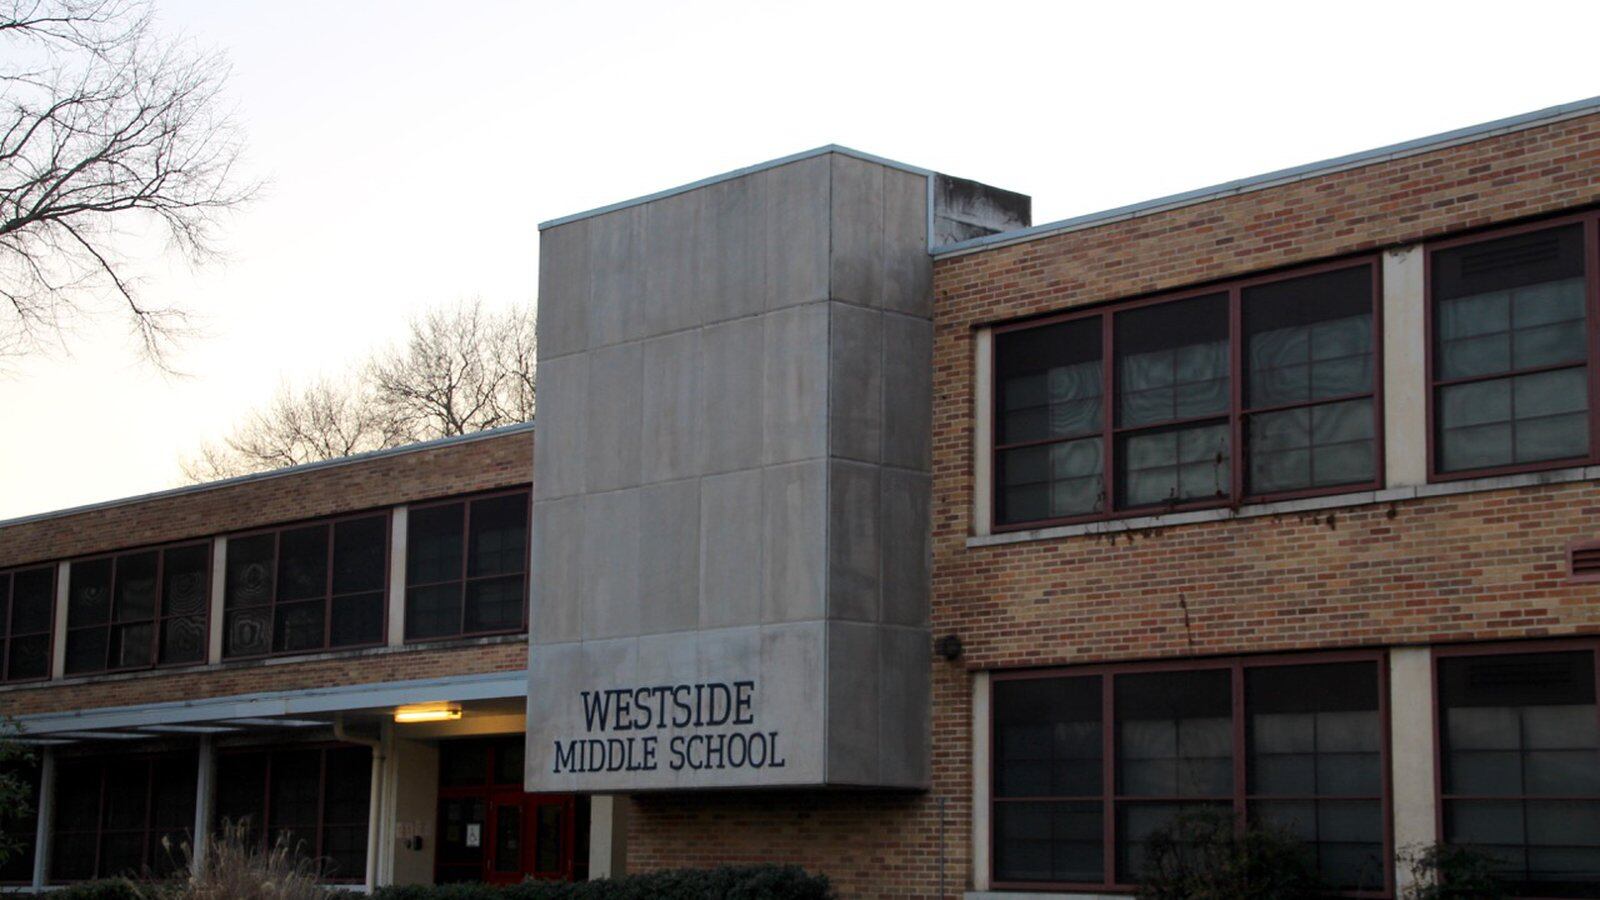 Westside Middle students will start the next school year under the new leadership of Rodney Peterson and Frayser Community Schools.